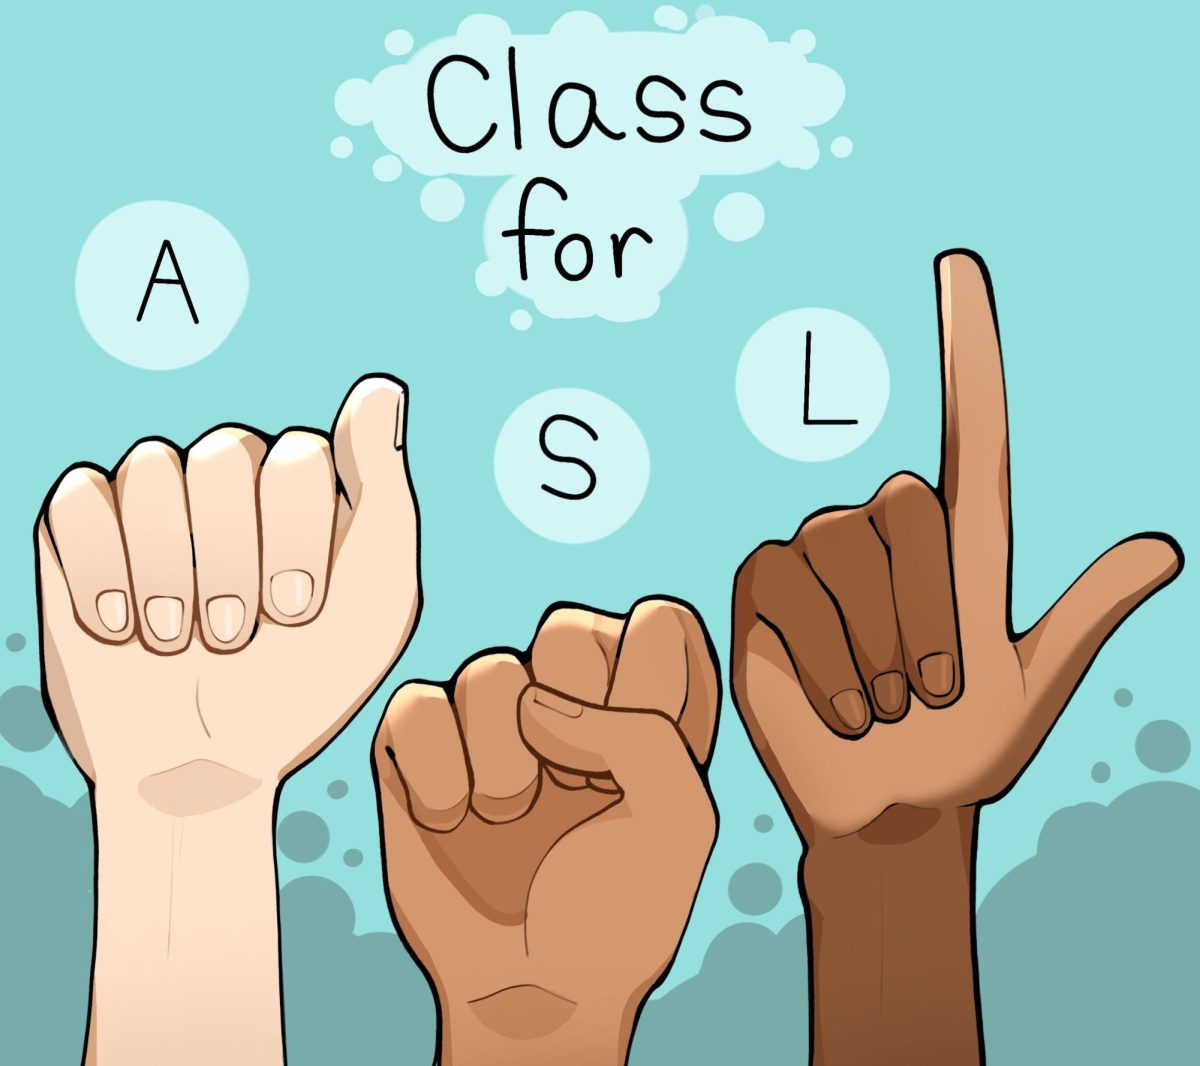 ASL should become an option for high school language requirements